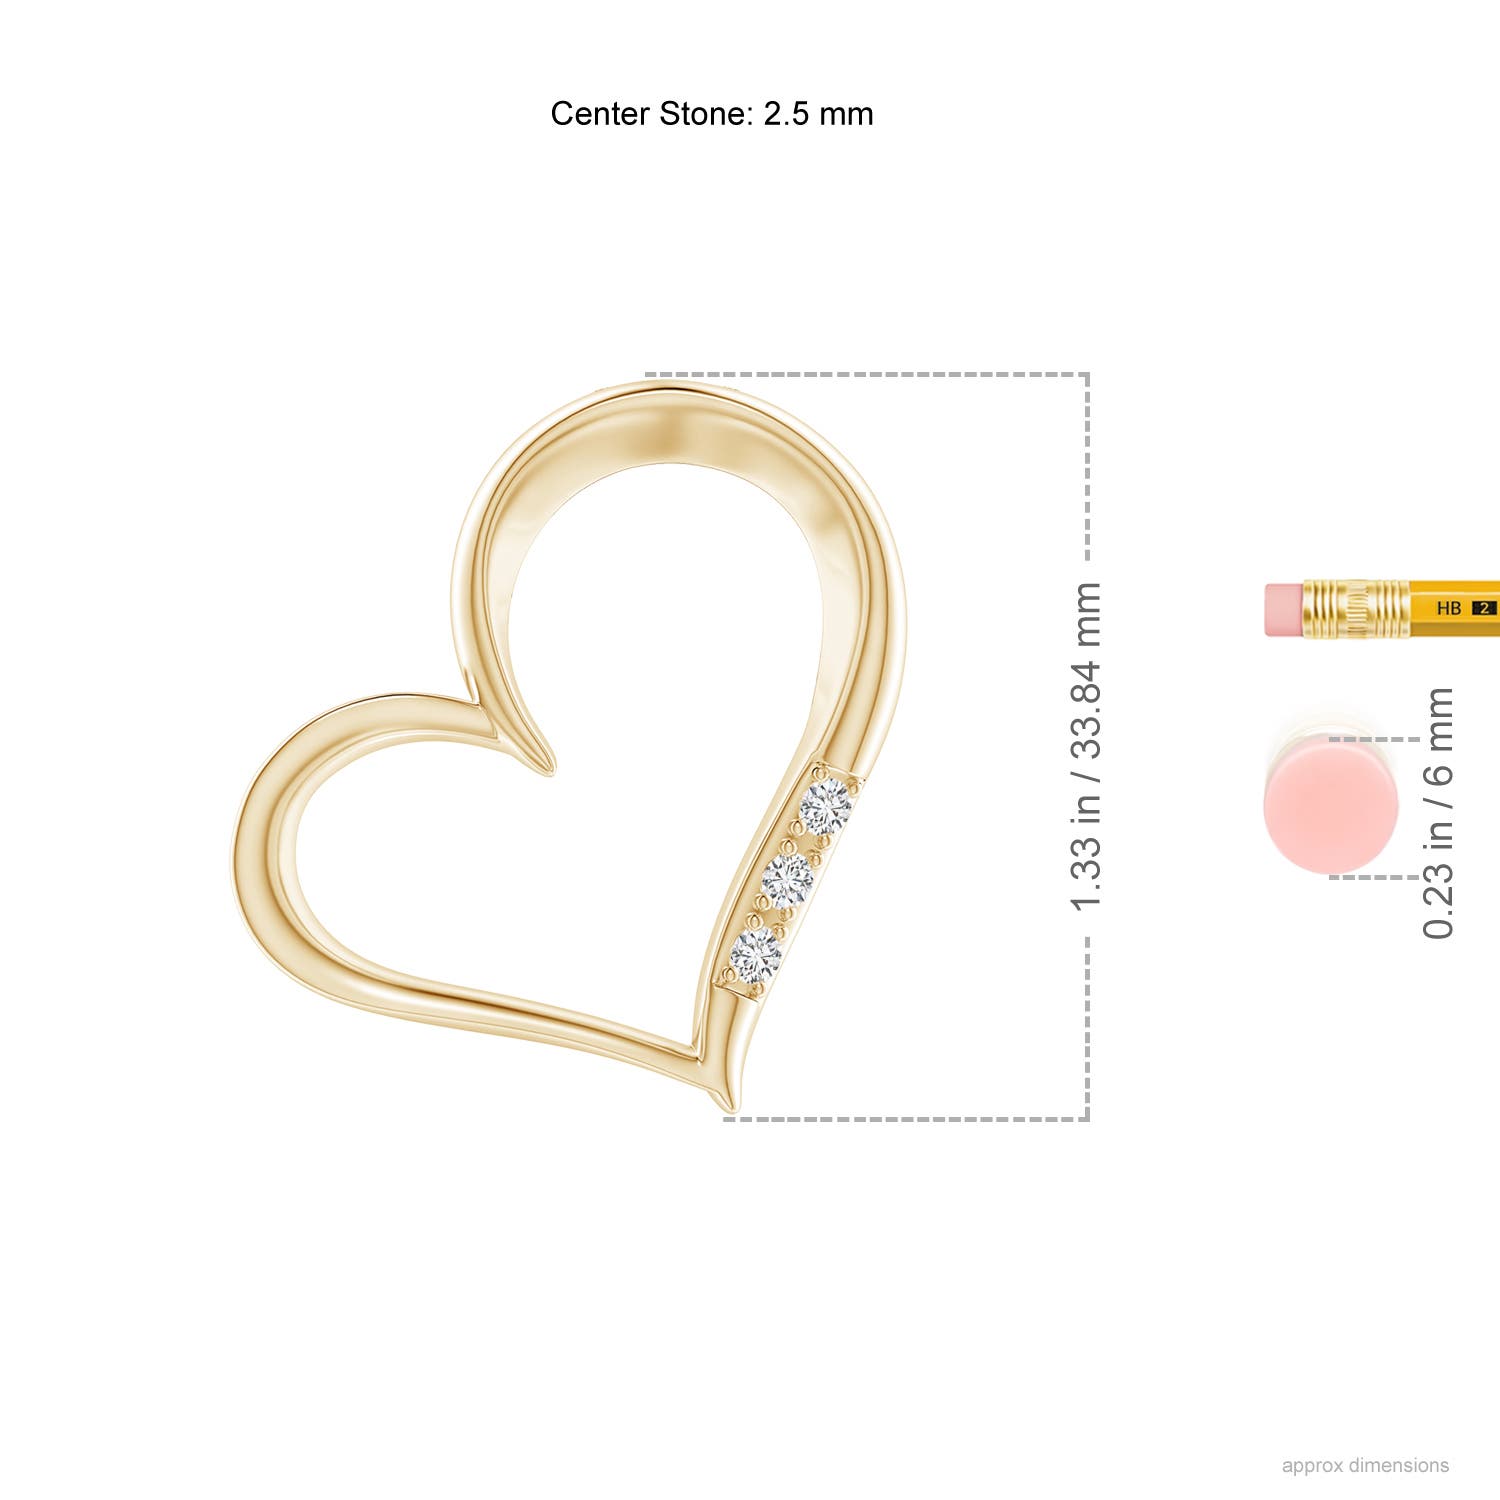 H, SI2 / 0.21 CT / 14 KT Yellow Gold